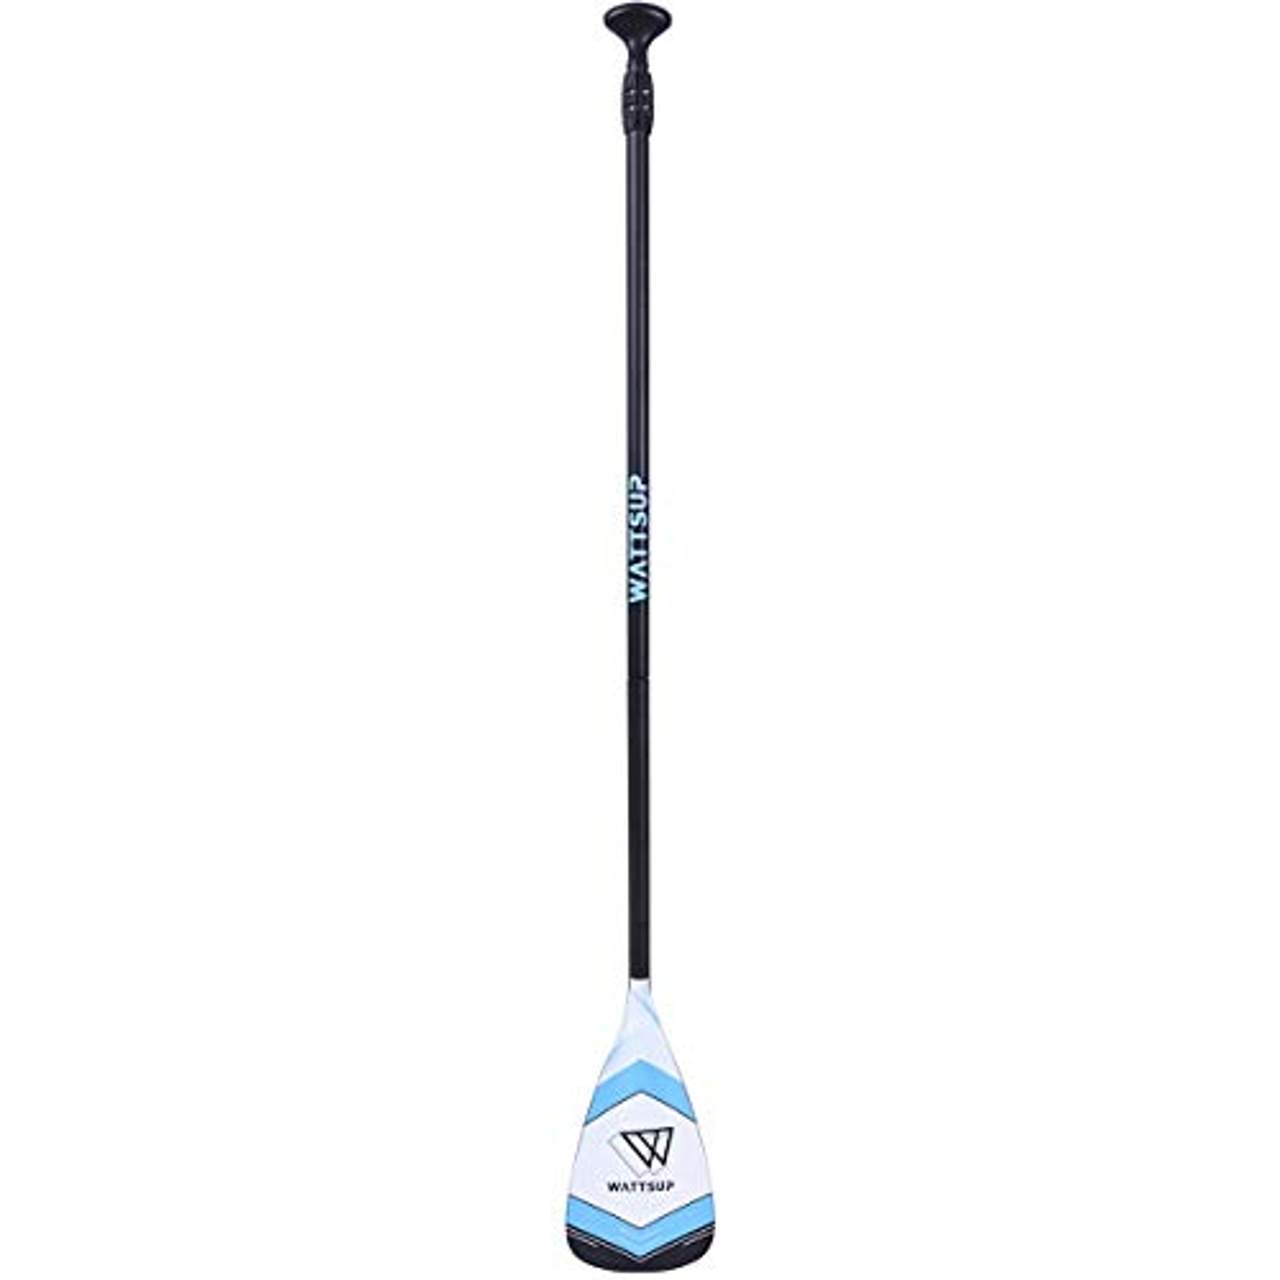 WS WattSUP Guppy 9’0” SUP Board Stand Up Paddle v